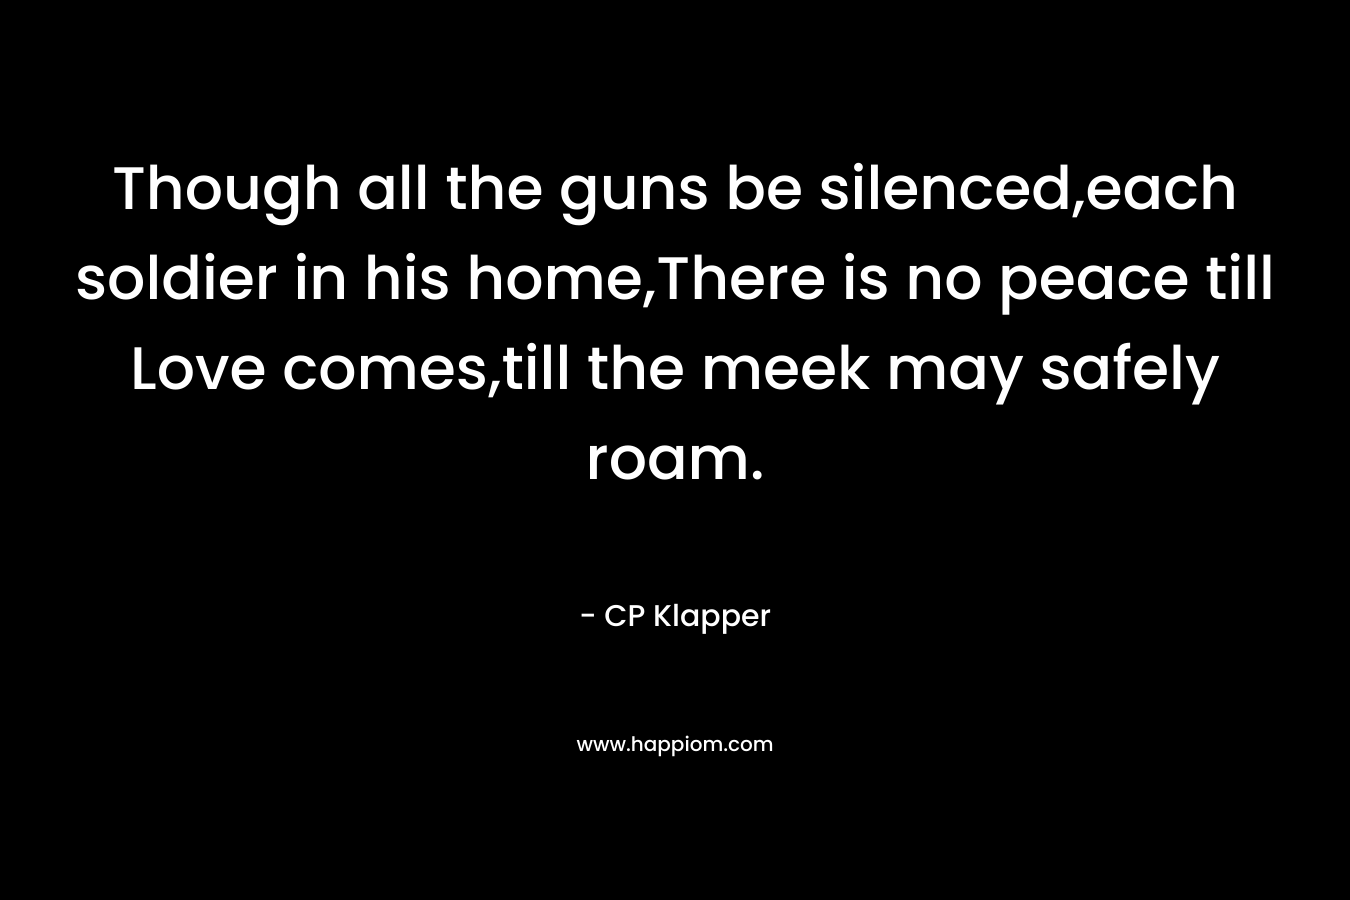 Though all the guns be silenced,each soldier in his home,There is no peace till Love comes,till the meek may safely roam.